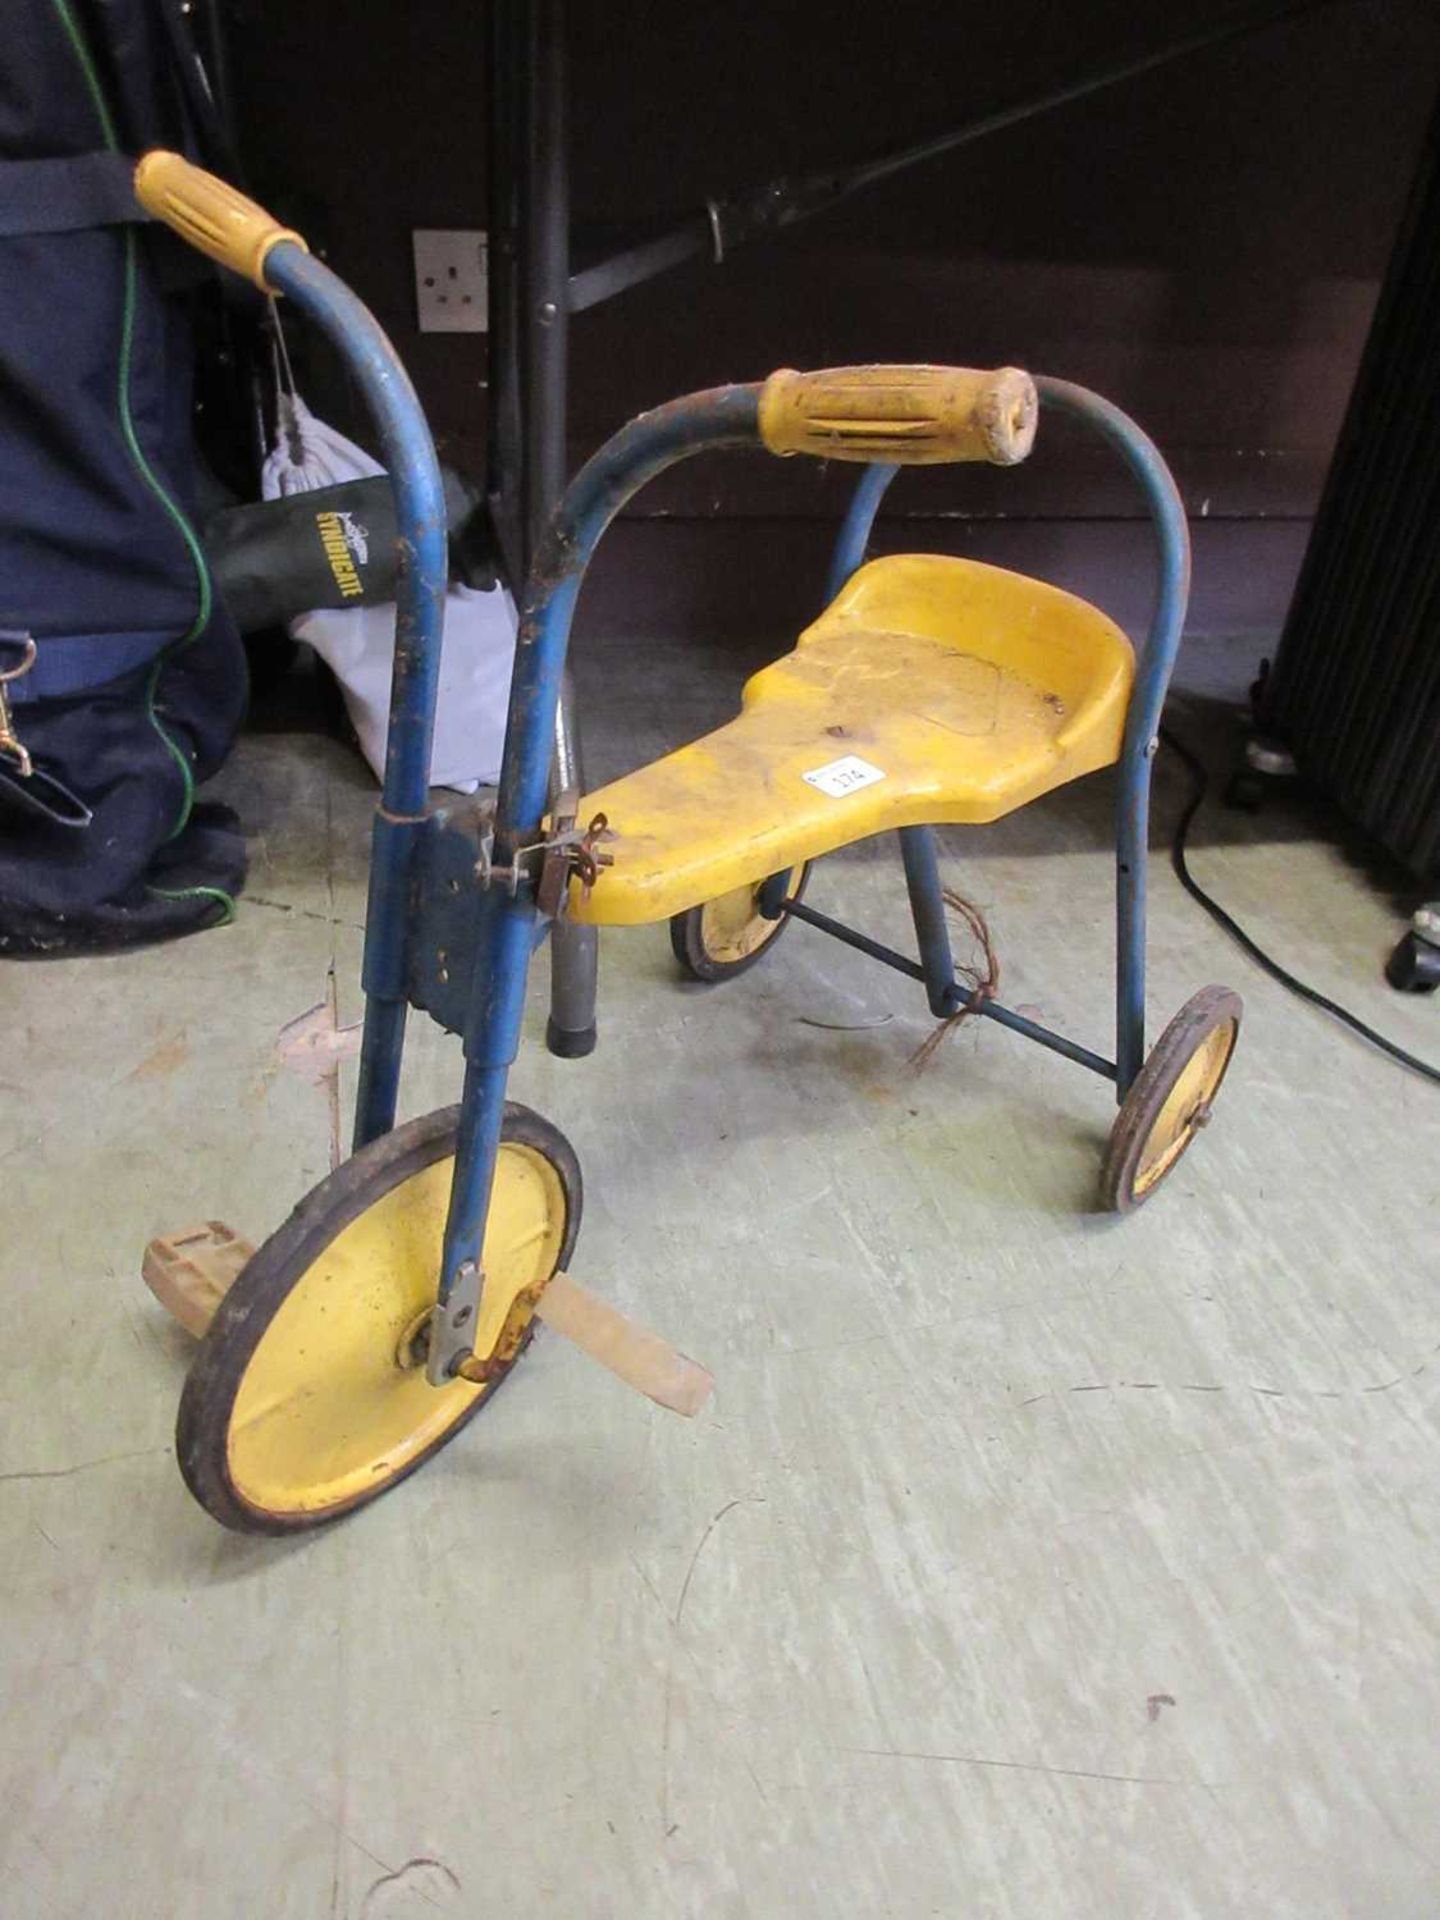 A child's mid-20th century tricycle